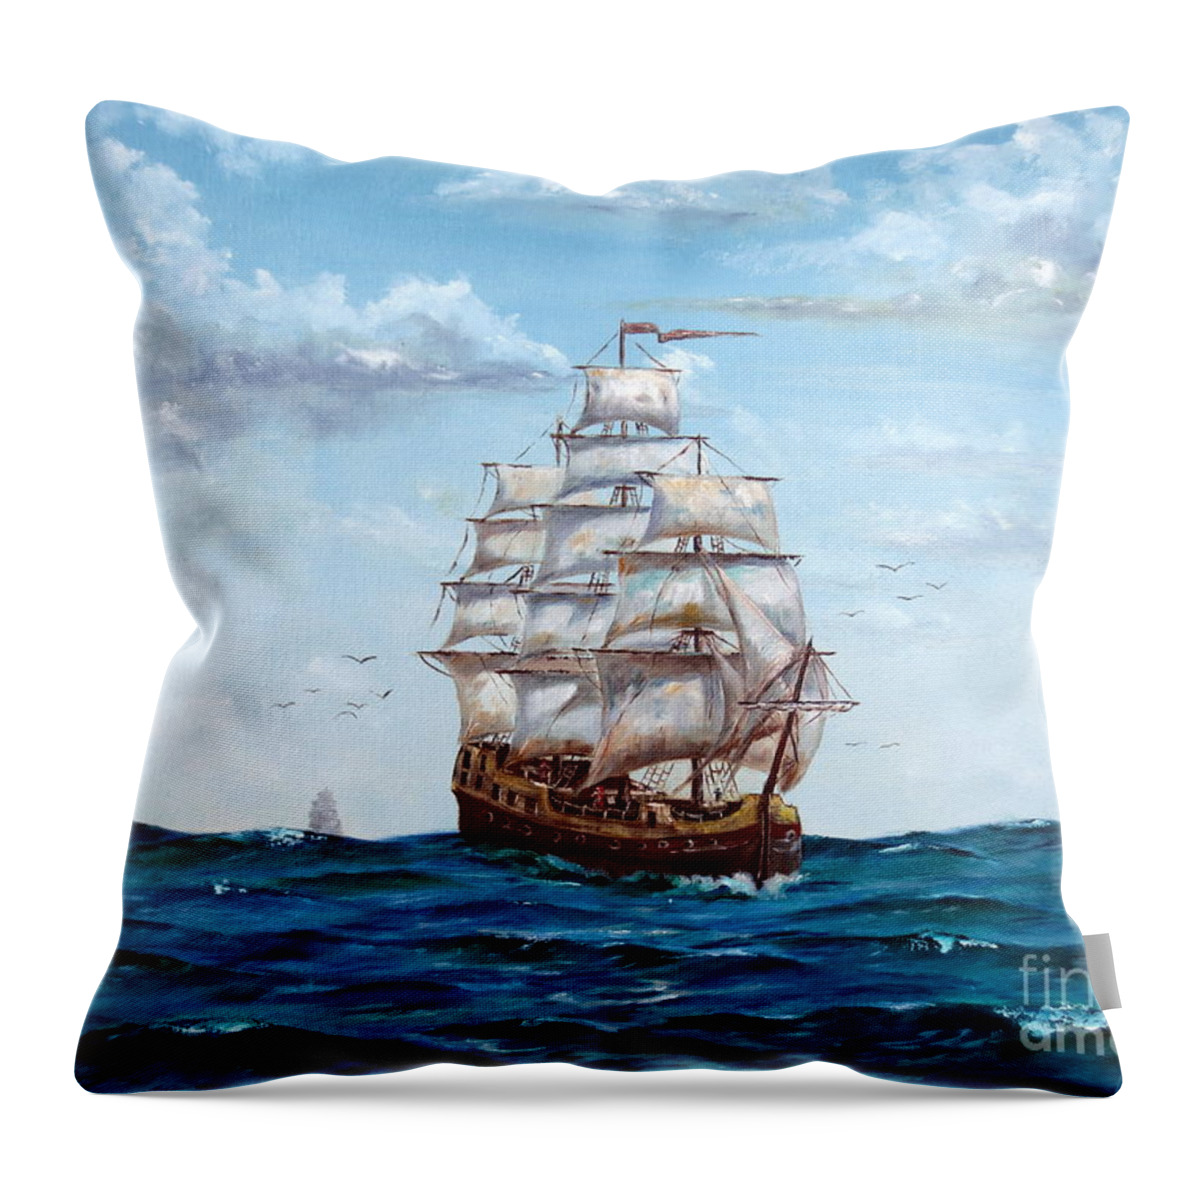 Lee Piper Throw Pillow featuring the painting Atlantic Crossing by Lee Piper